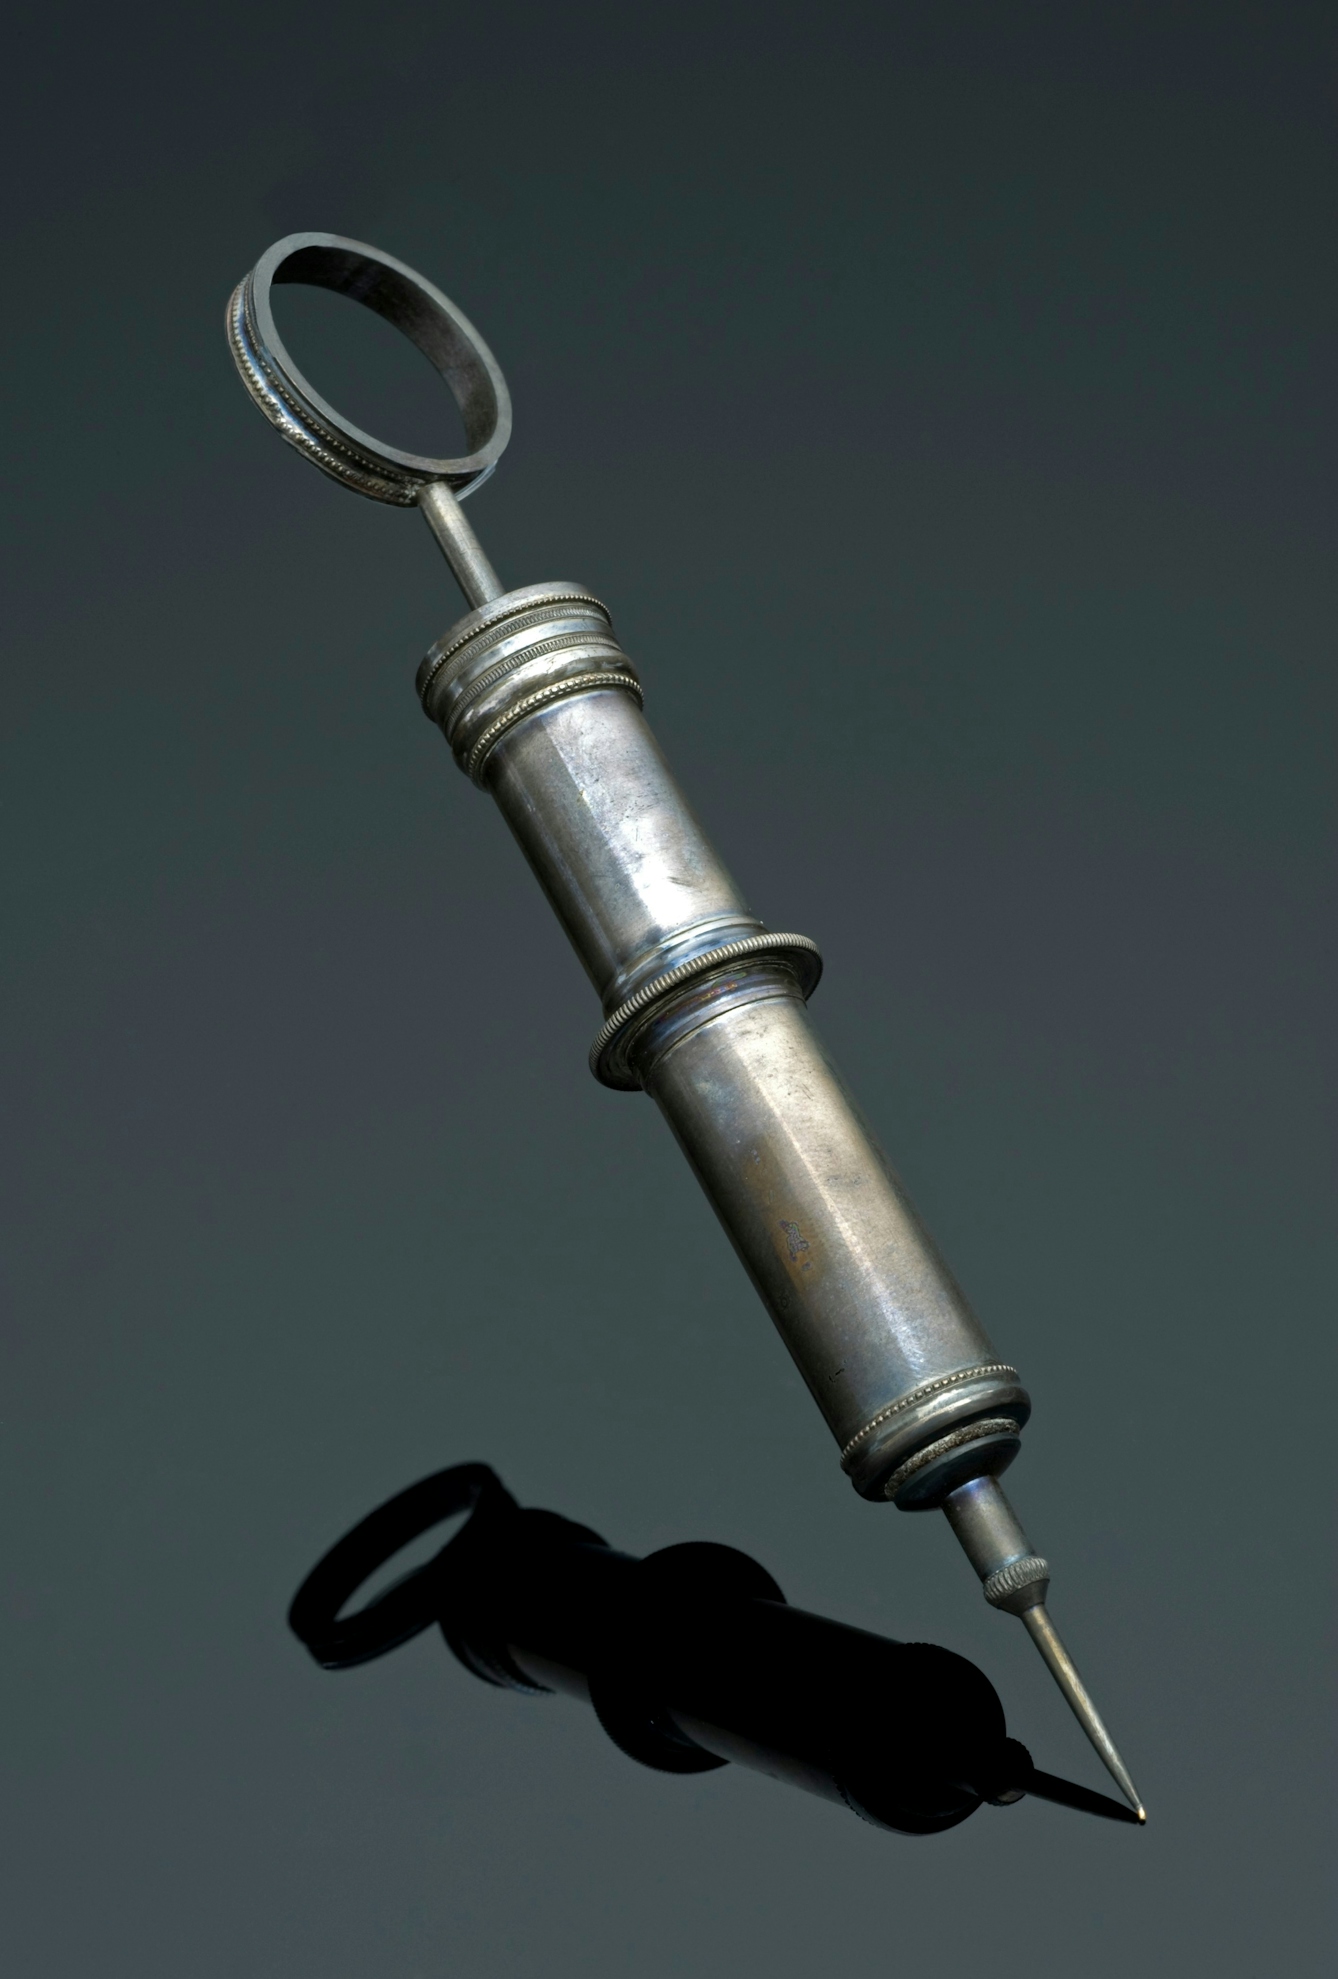 Syringe made of metal (with a slight patina) with a large circular plunger at the end and a thick needle.